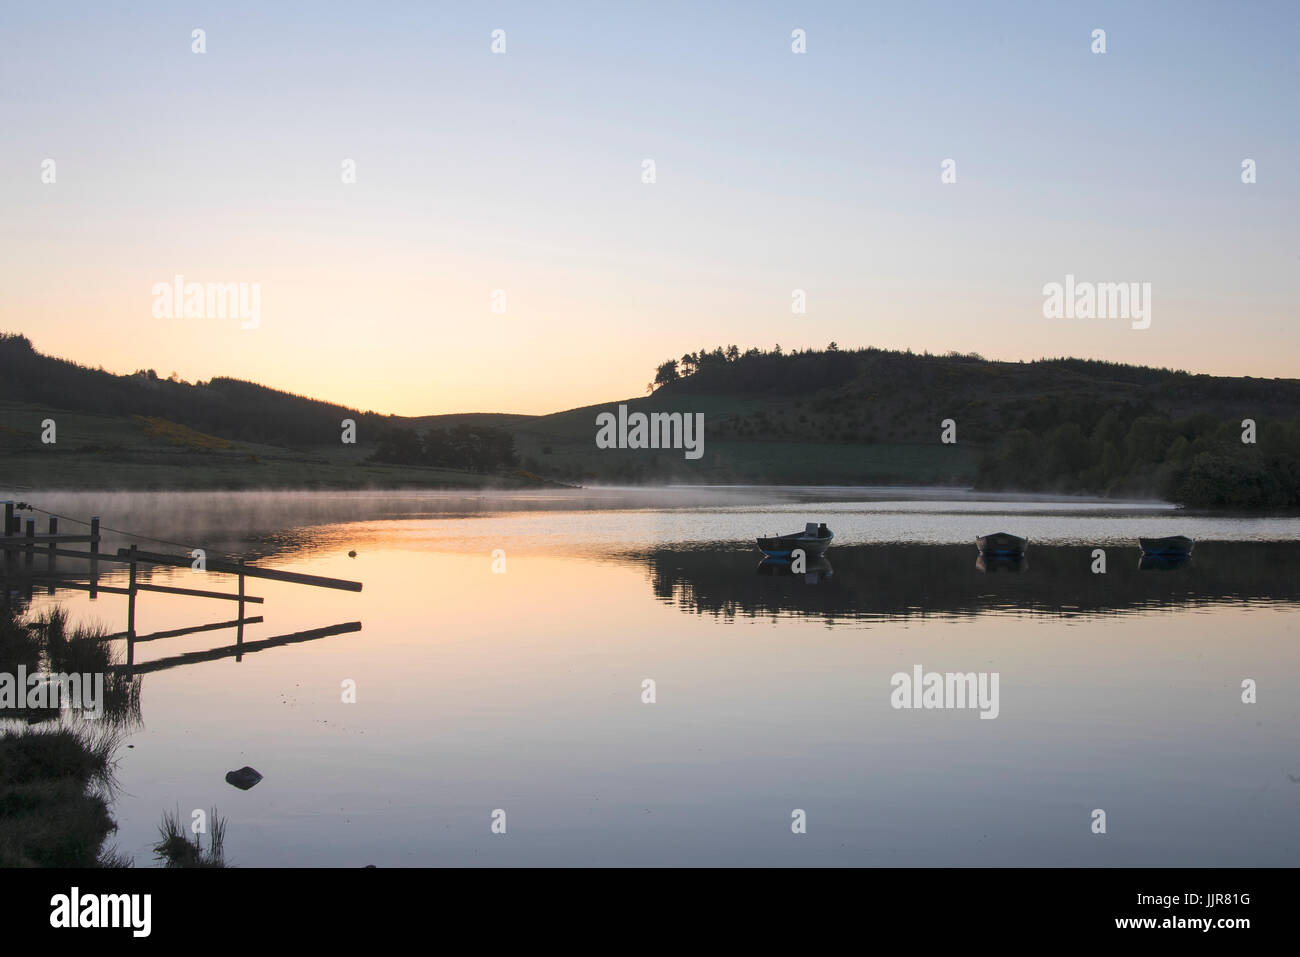 An early morning image of Knapps Loch which lies in a picturesque setting just south of Kilmacolm village, central Scotland. Stock Photo